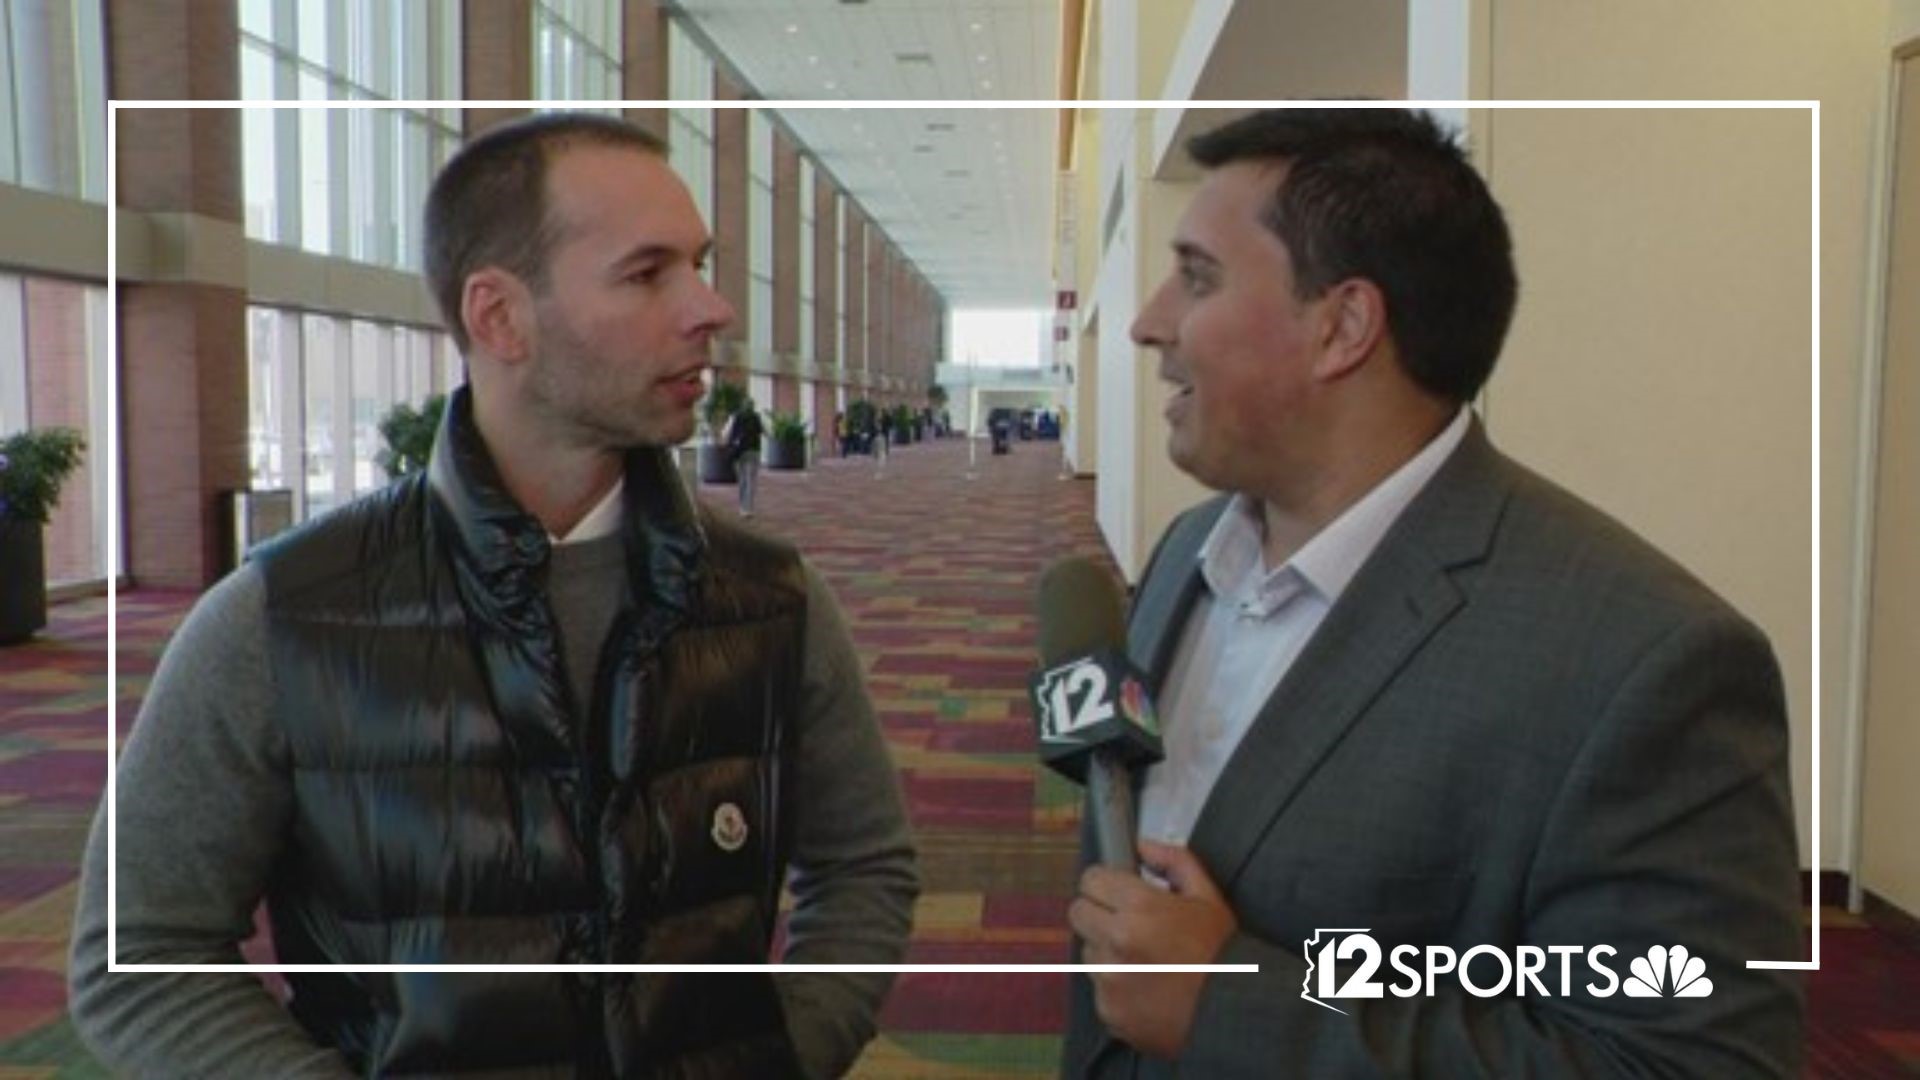 The Arizona Cardinals' new head coach Jonathan Gannon spoke with 12Sports at the NFL Scouting Combine in Indianapolis on Tuesday, sharing updates on the team.